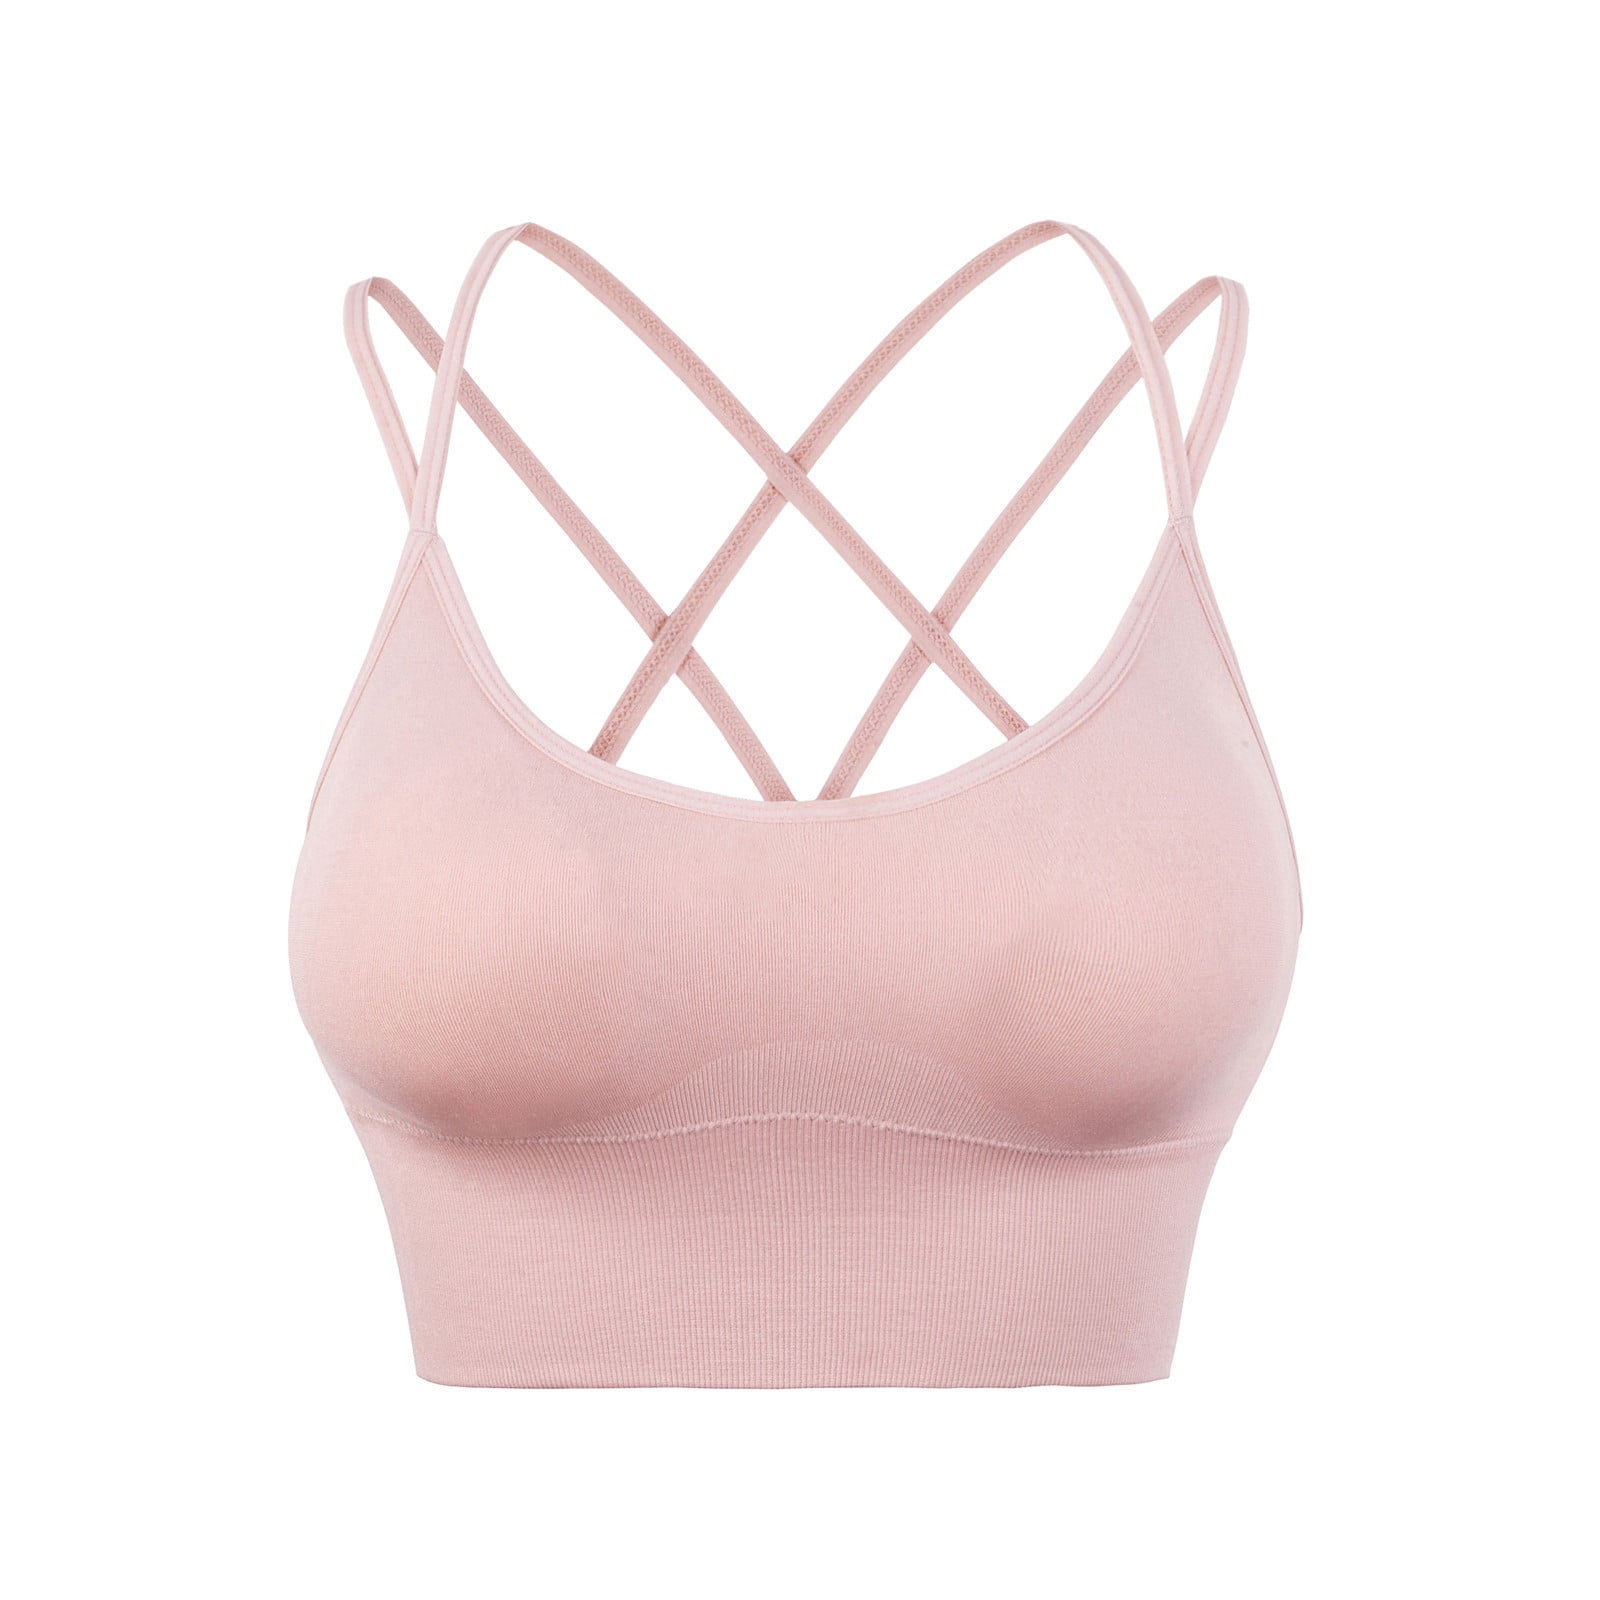 Yoga Outfit Women Strappy Sport Bra Sexy Nude Feel Criss Cross